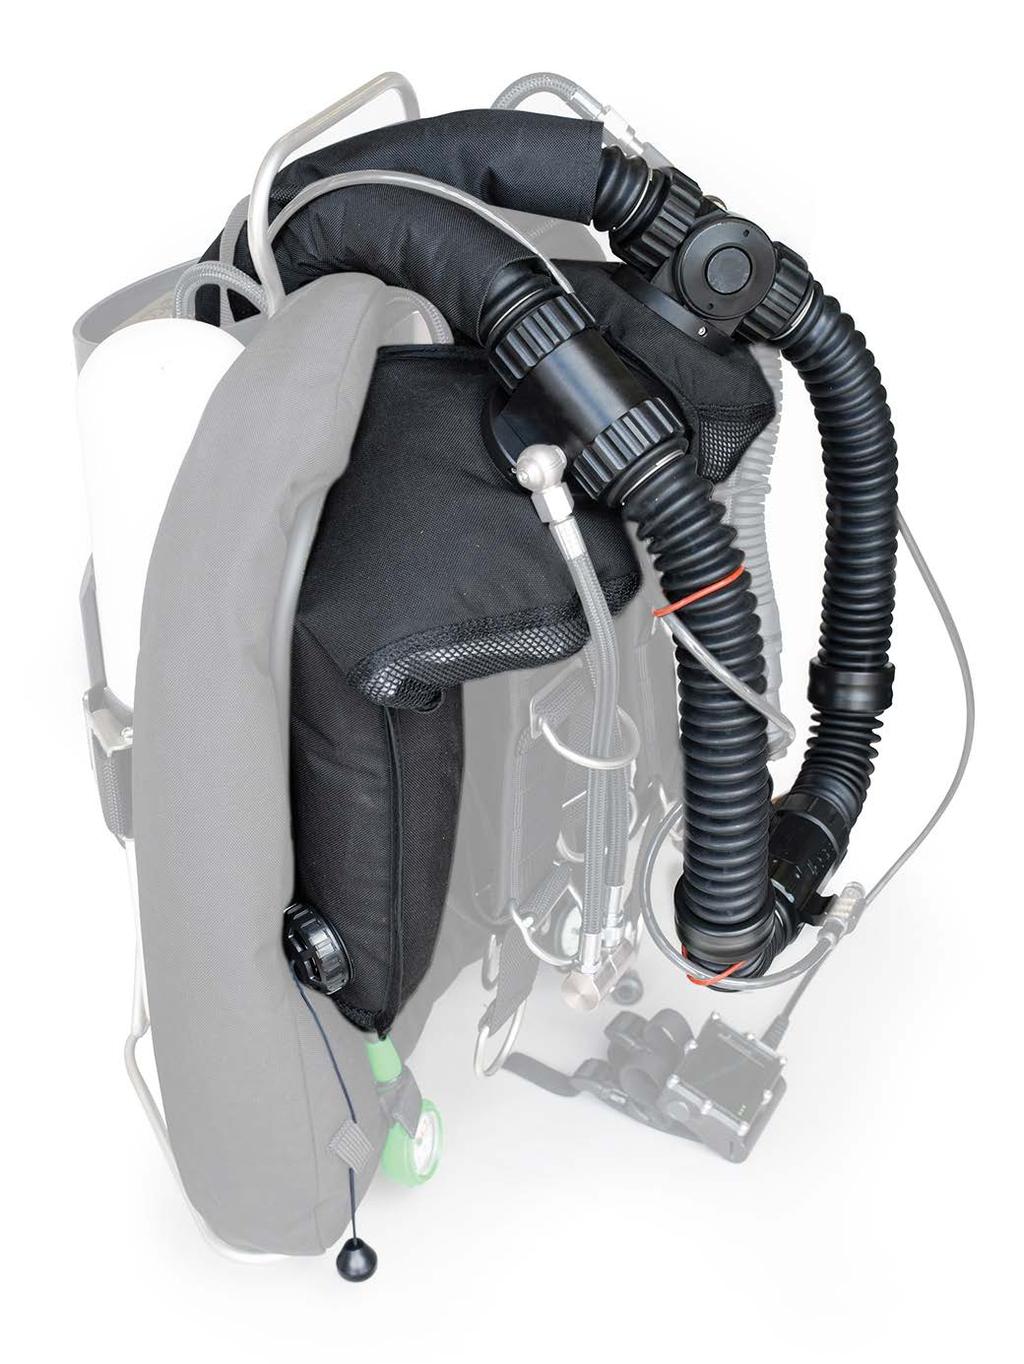 INDUSTRY LOW WORK OF BREATHING The JJ-CCR Rebreather has a industry low work of breathing.